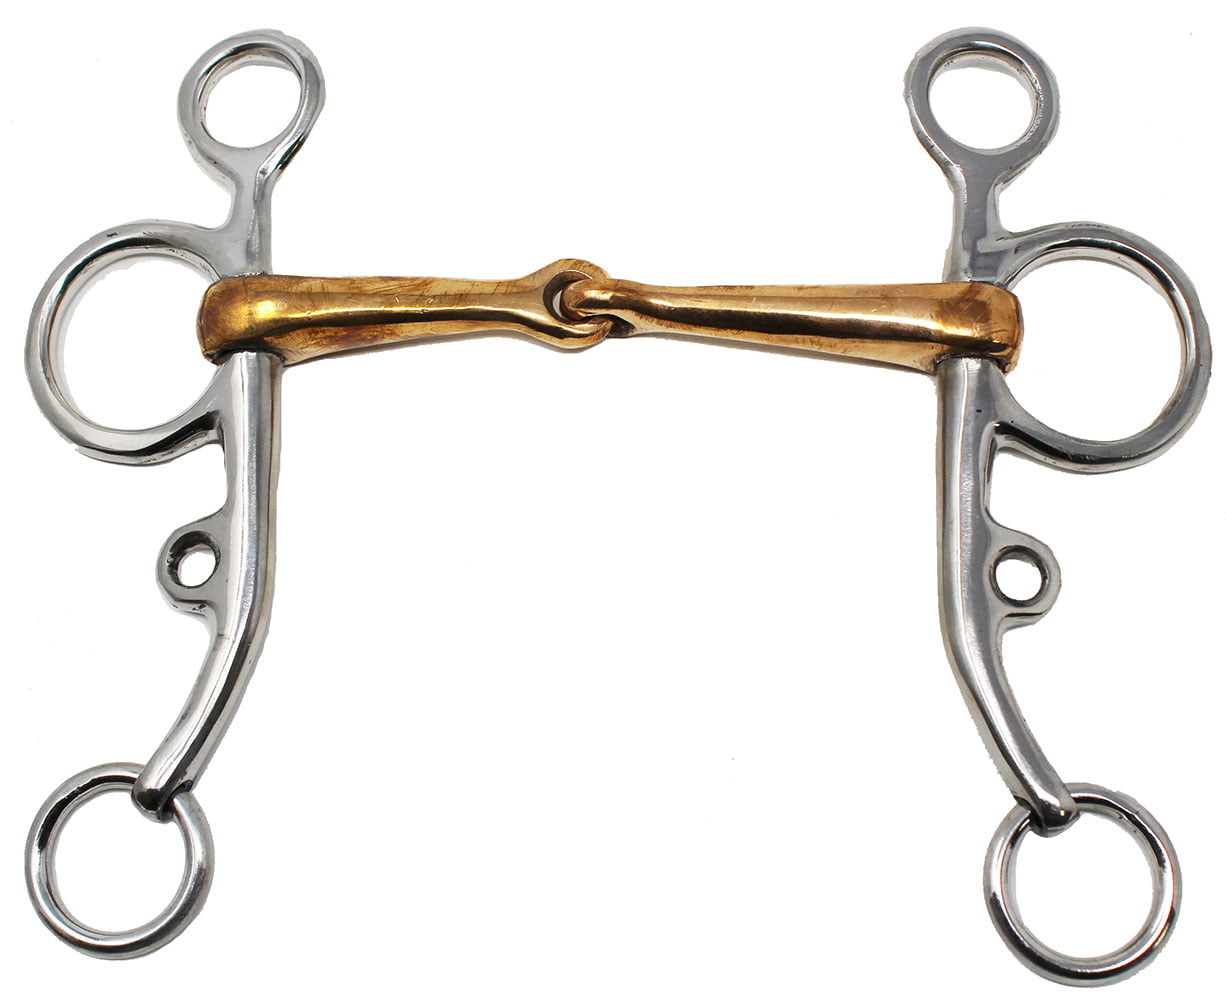 5" Stainless Steel Gag or Elevator Bit w/ Solid Copper Mouth Western Horse Tack 